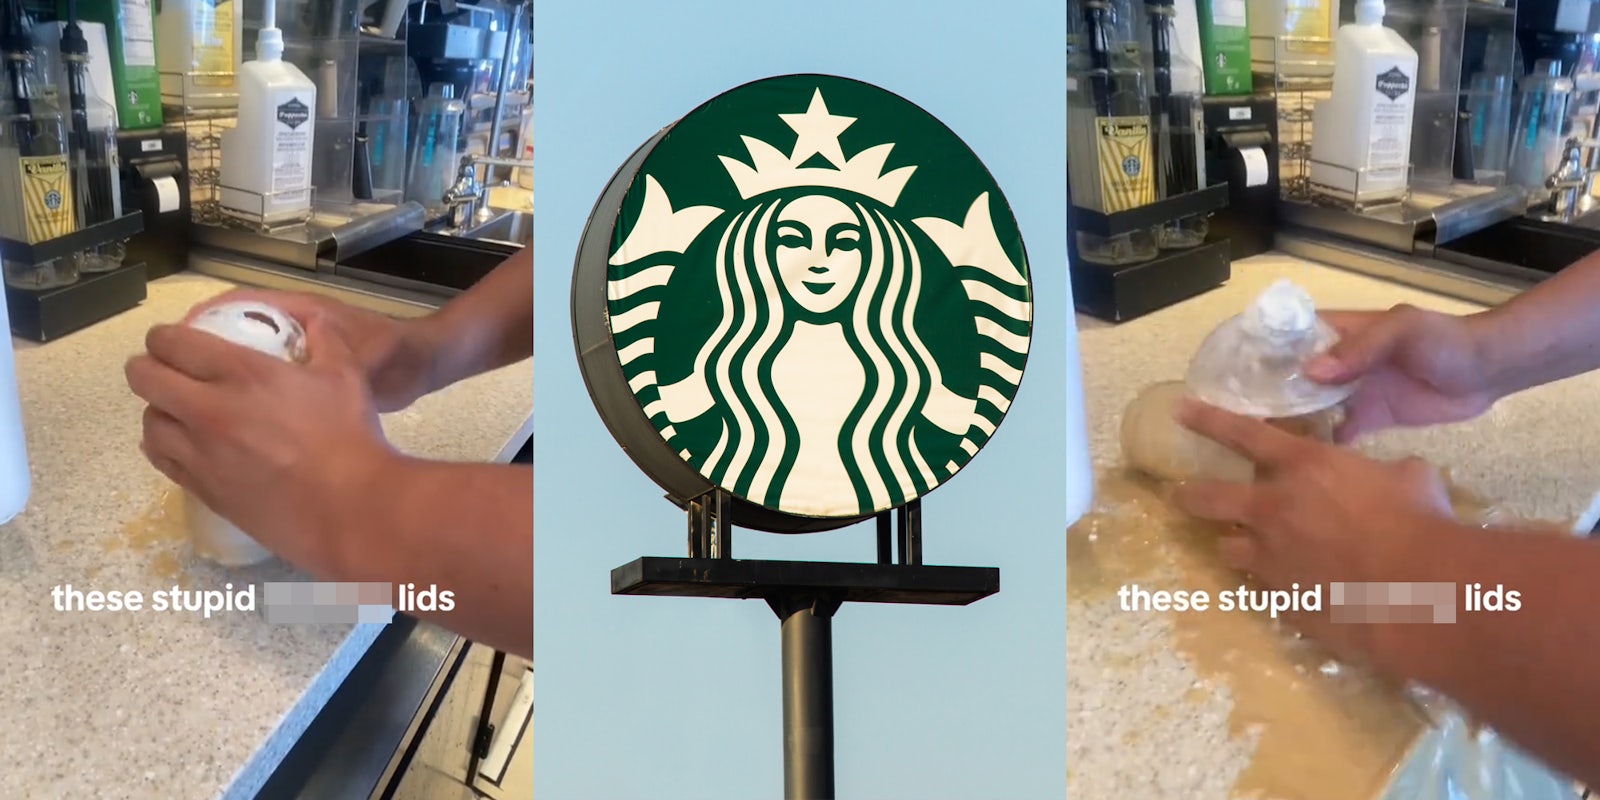 Starbucks employee pressing lid down onto cup with caption 'these stupid blank lids' (l) Starbucks sign in front of blue sky (c) Starbucks employee pressing lid down onto cup with drink spilled with caption 'these stupid blank lids' (r)